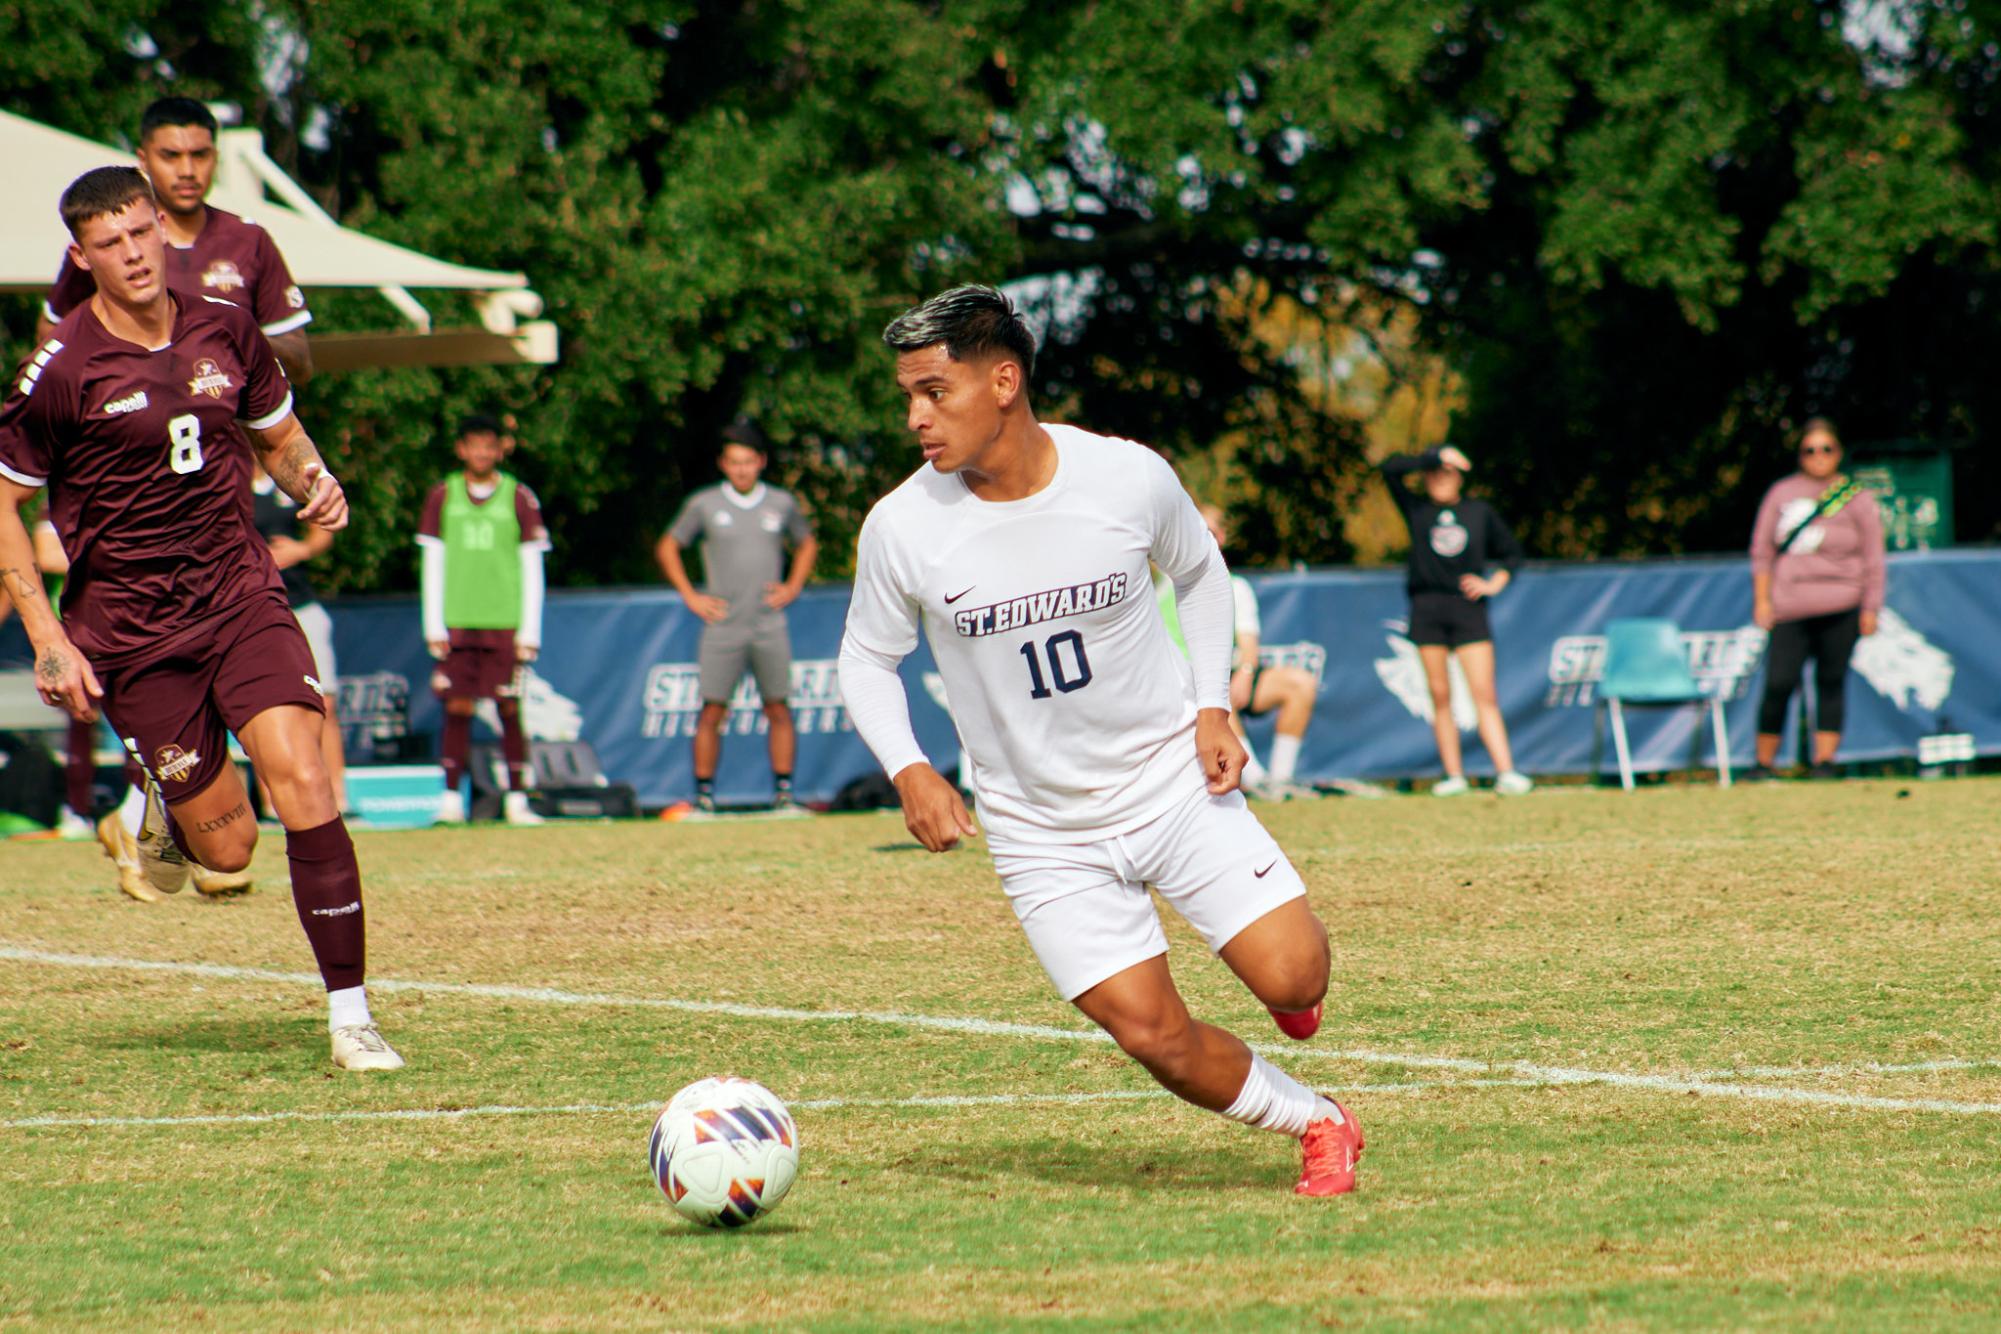 GAME DAY: Men’s soccer faces 2-0 loss in second half against Texas A&M International